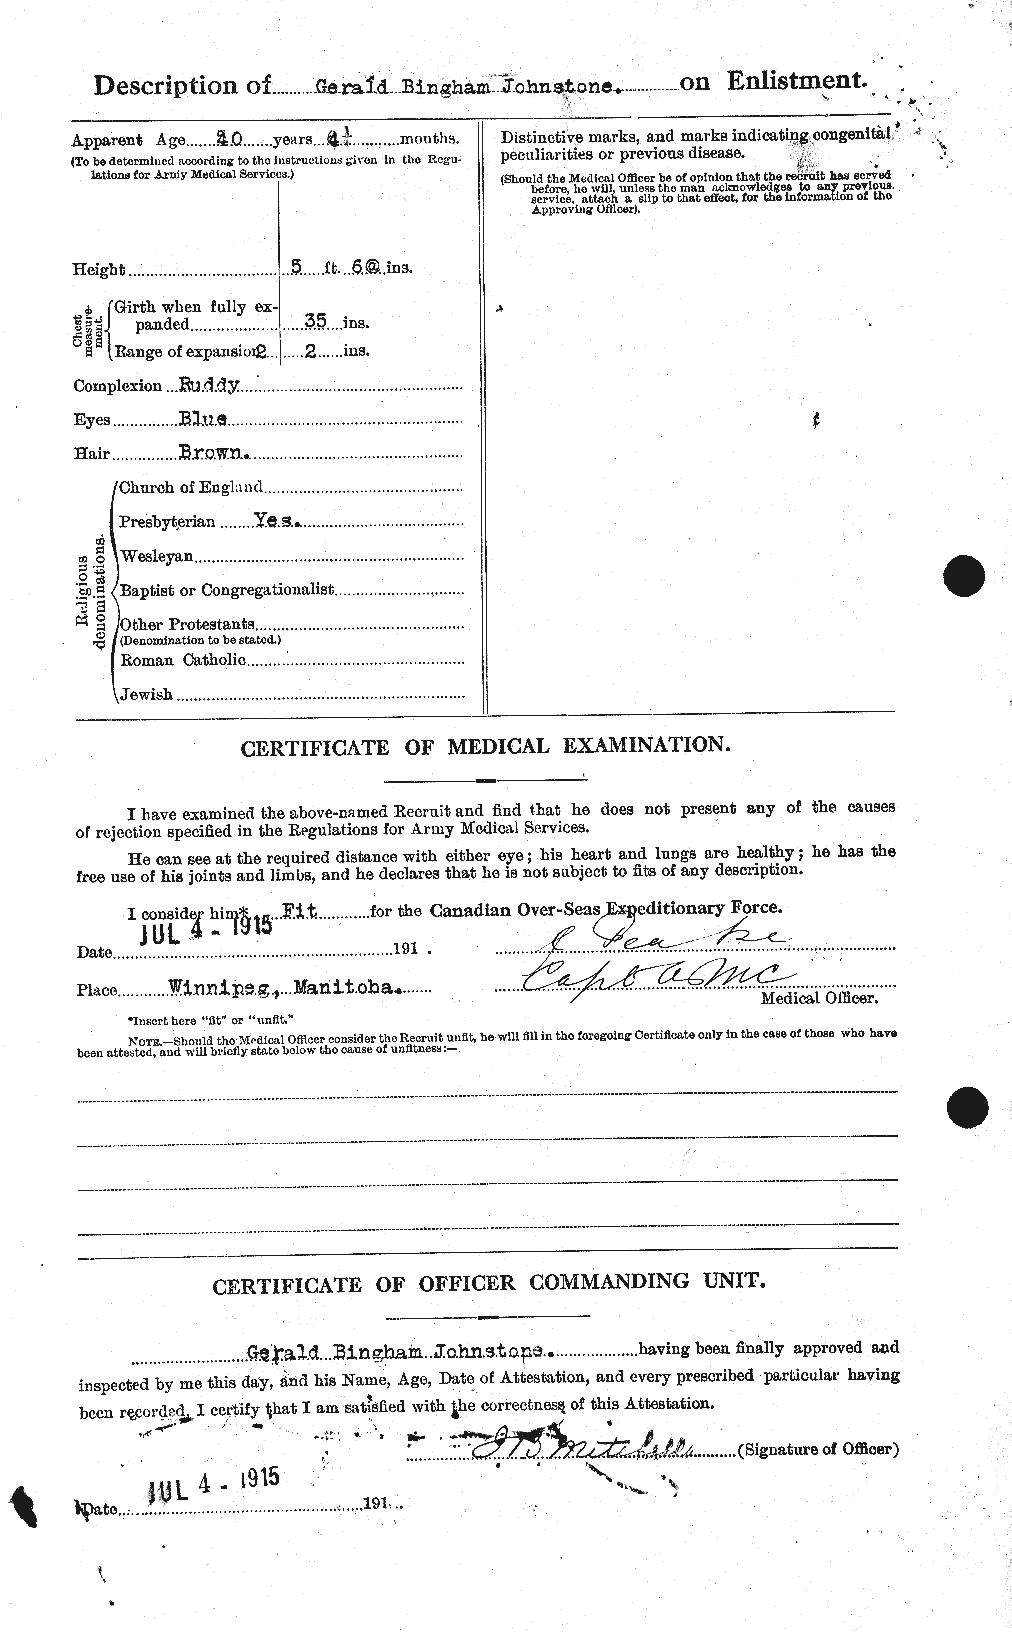 Personnel Records of the First World War - CEF 419598b